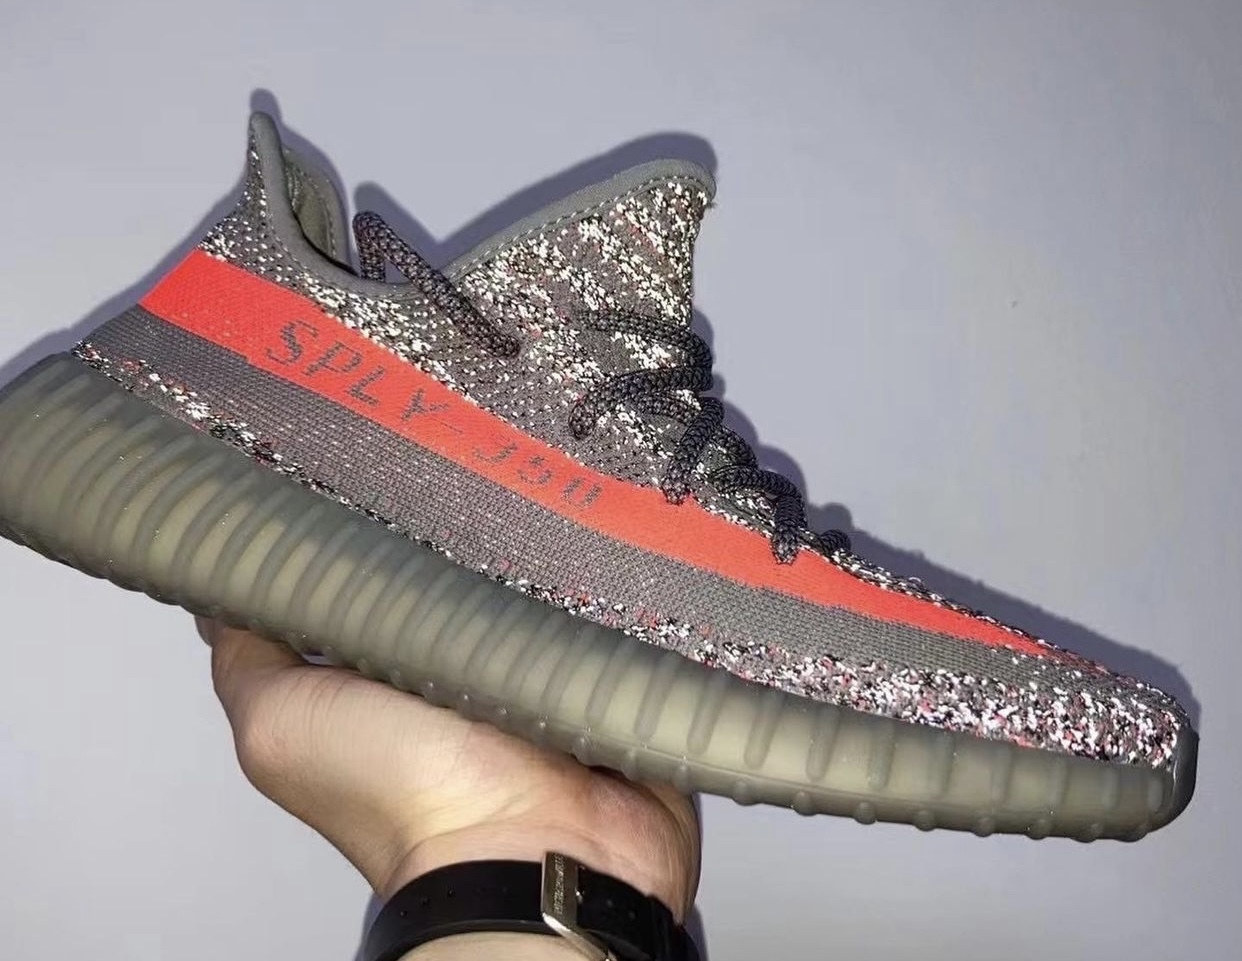 adidas Yeezy Boost 350 V2 Beluga Reflective Release Date positions Look 1